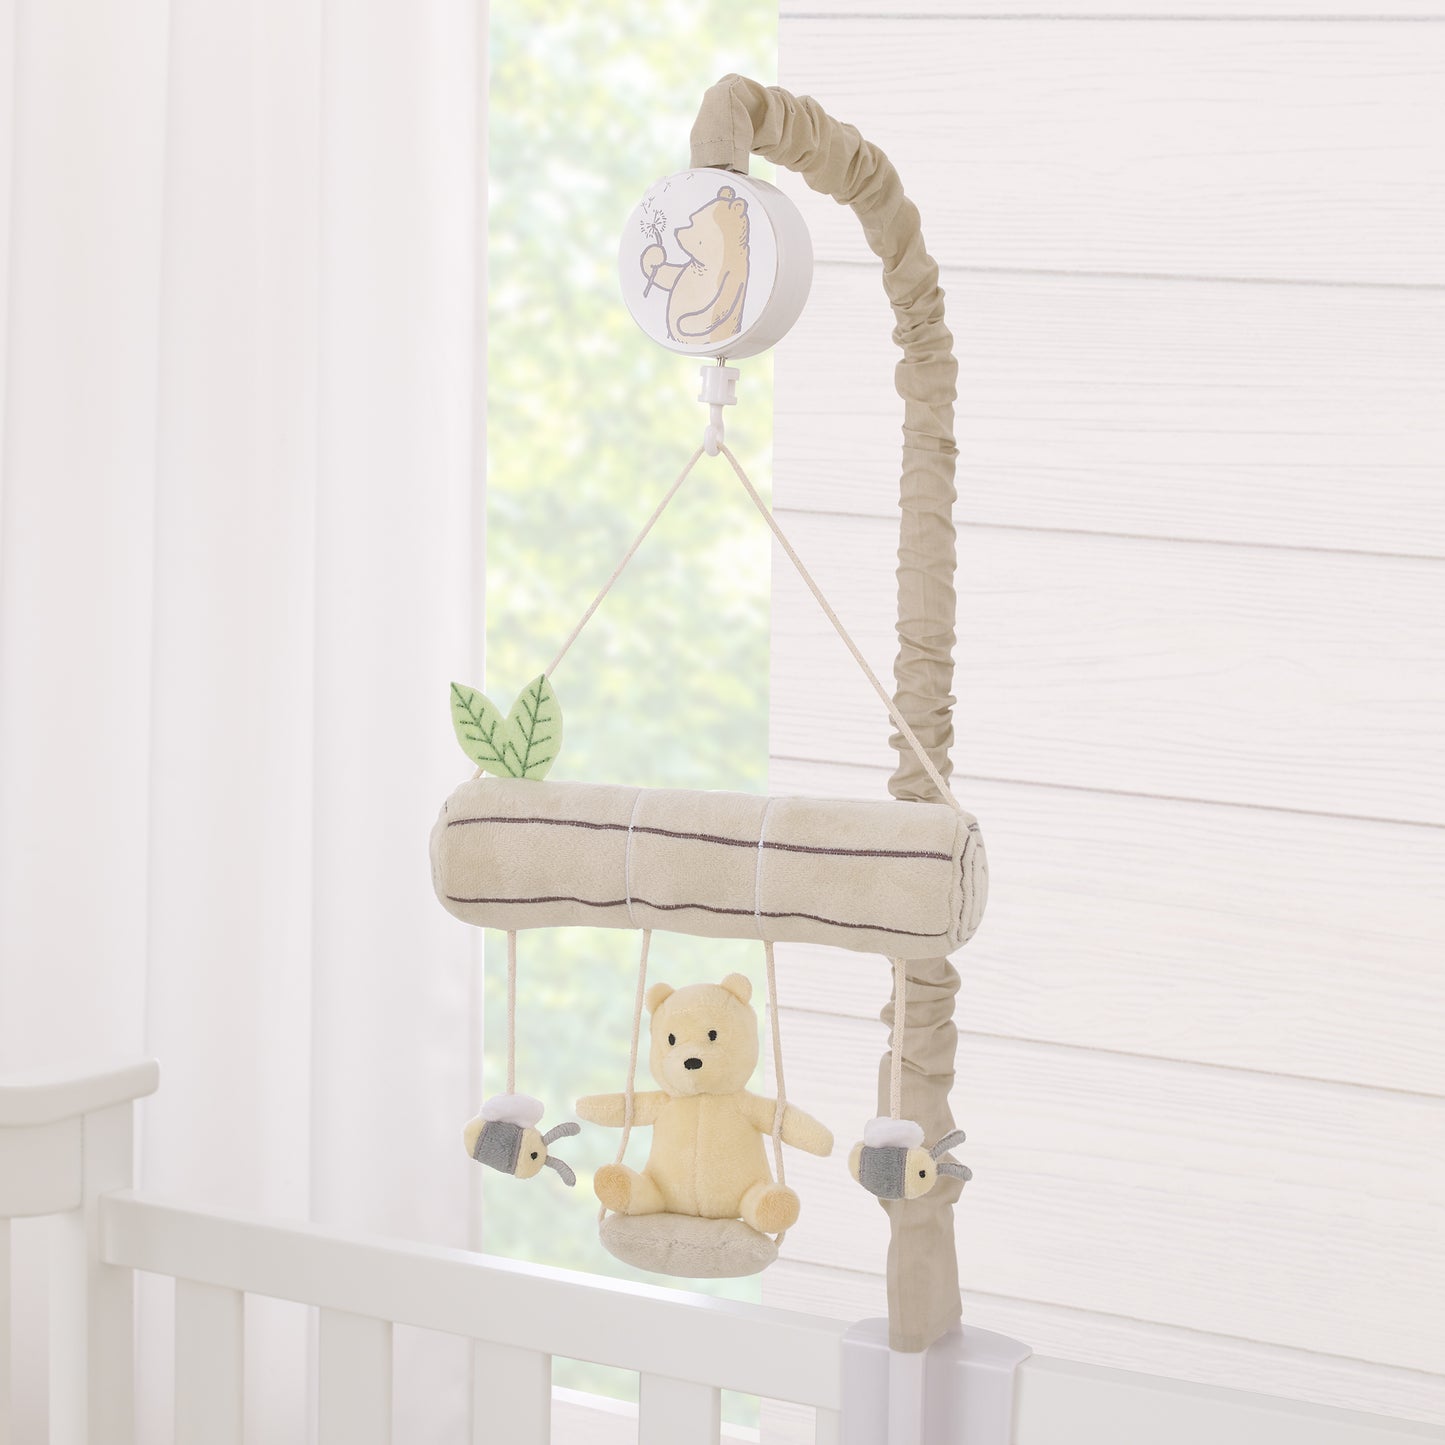 Disney Classic Pooh Naturally Friends Soft Beige Plush Swing and Tree Branch Musical Mobile